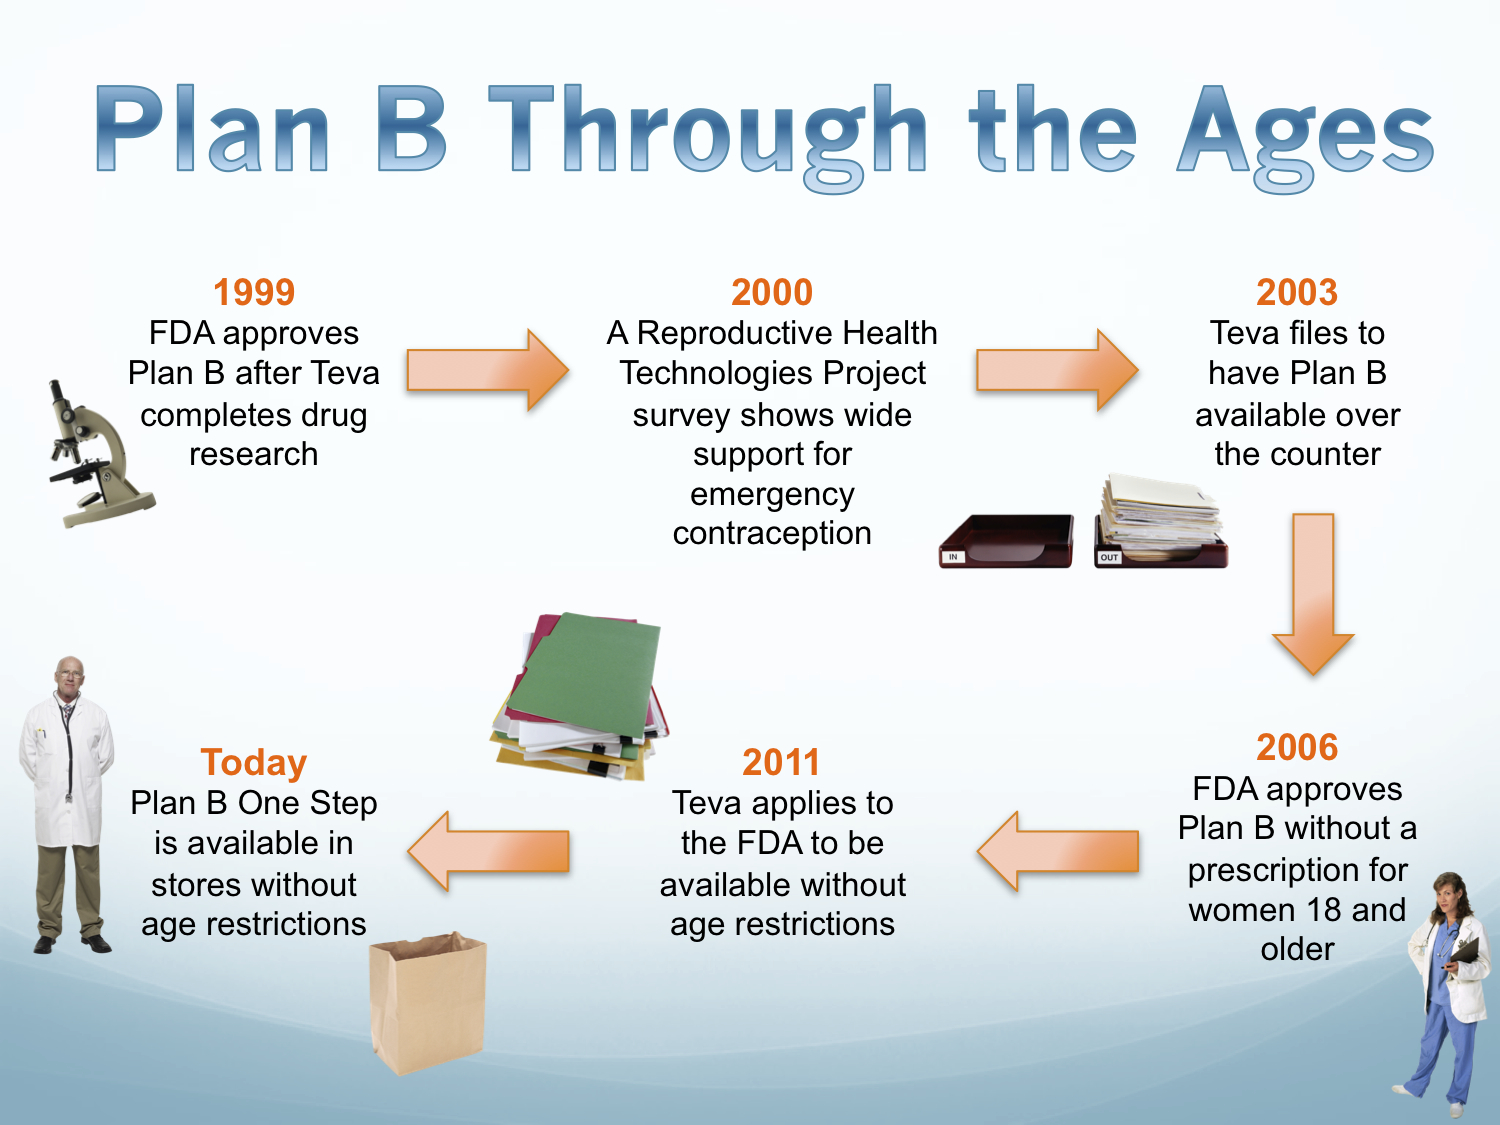 Plan B One Step Without Age Restrictions: What the Move Really Means 